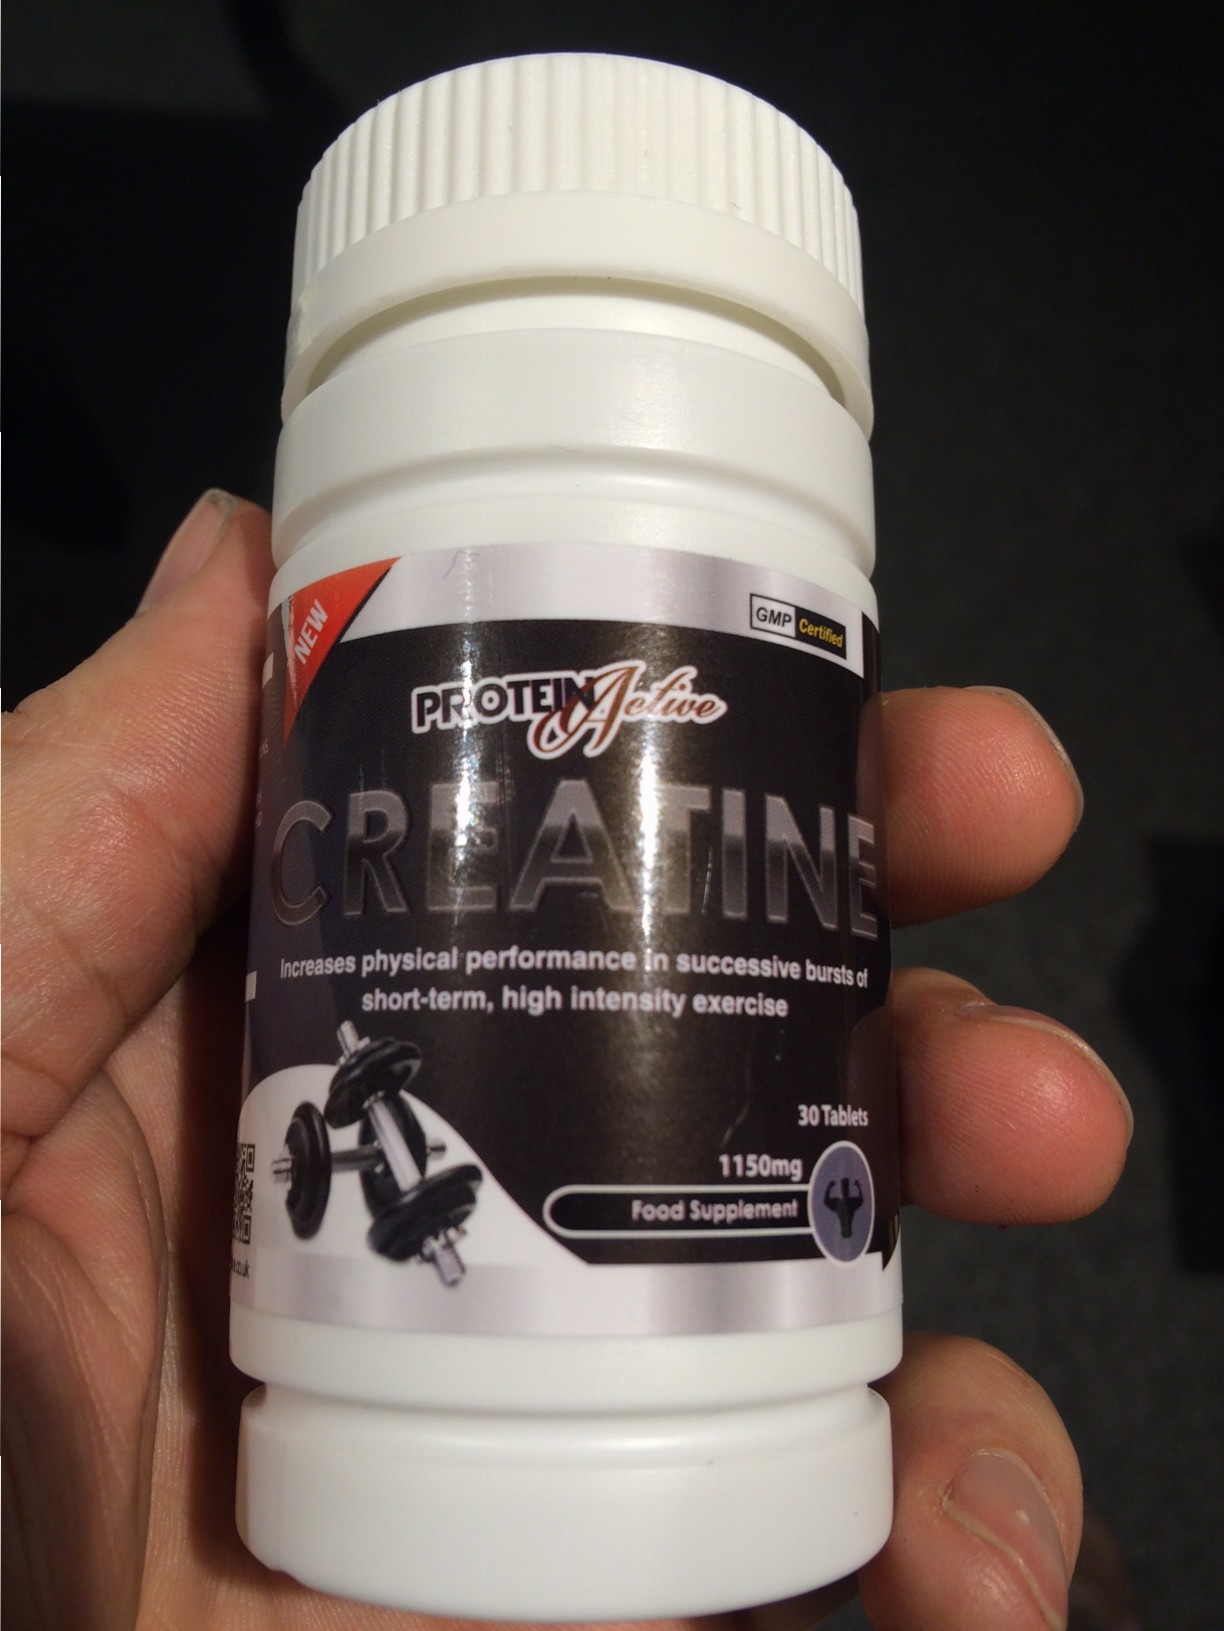 Protein Active Creatine Tablets Review